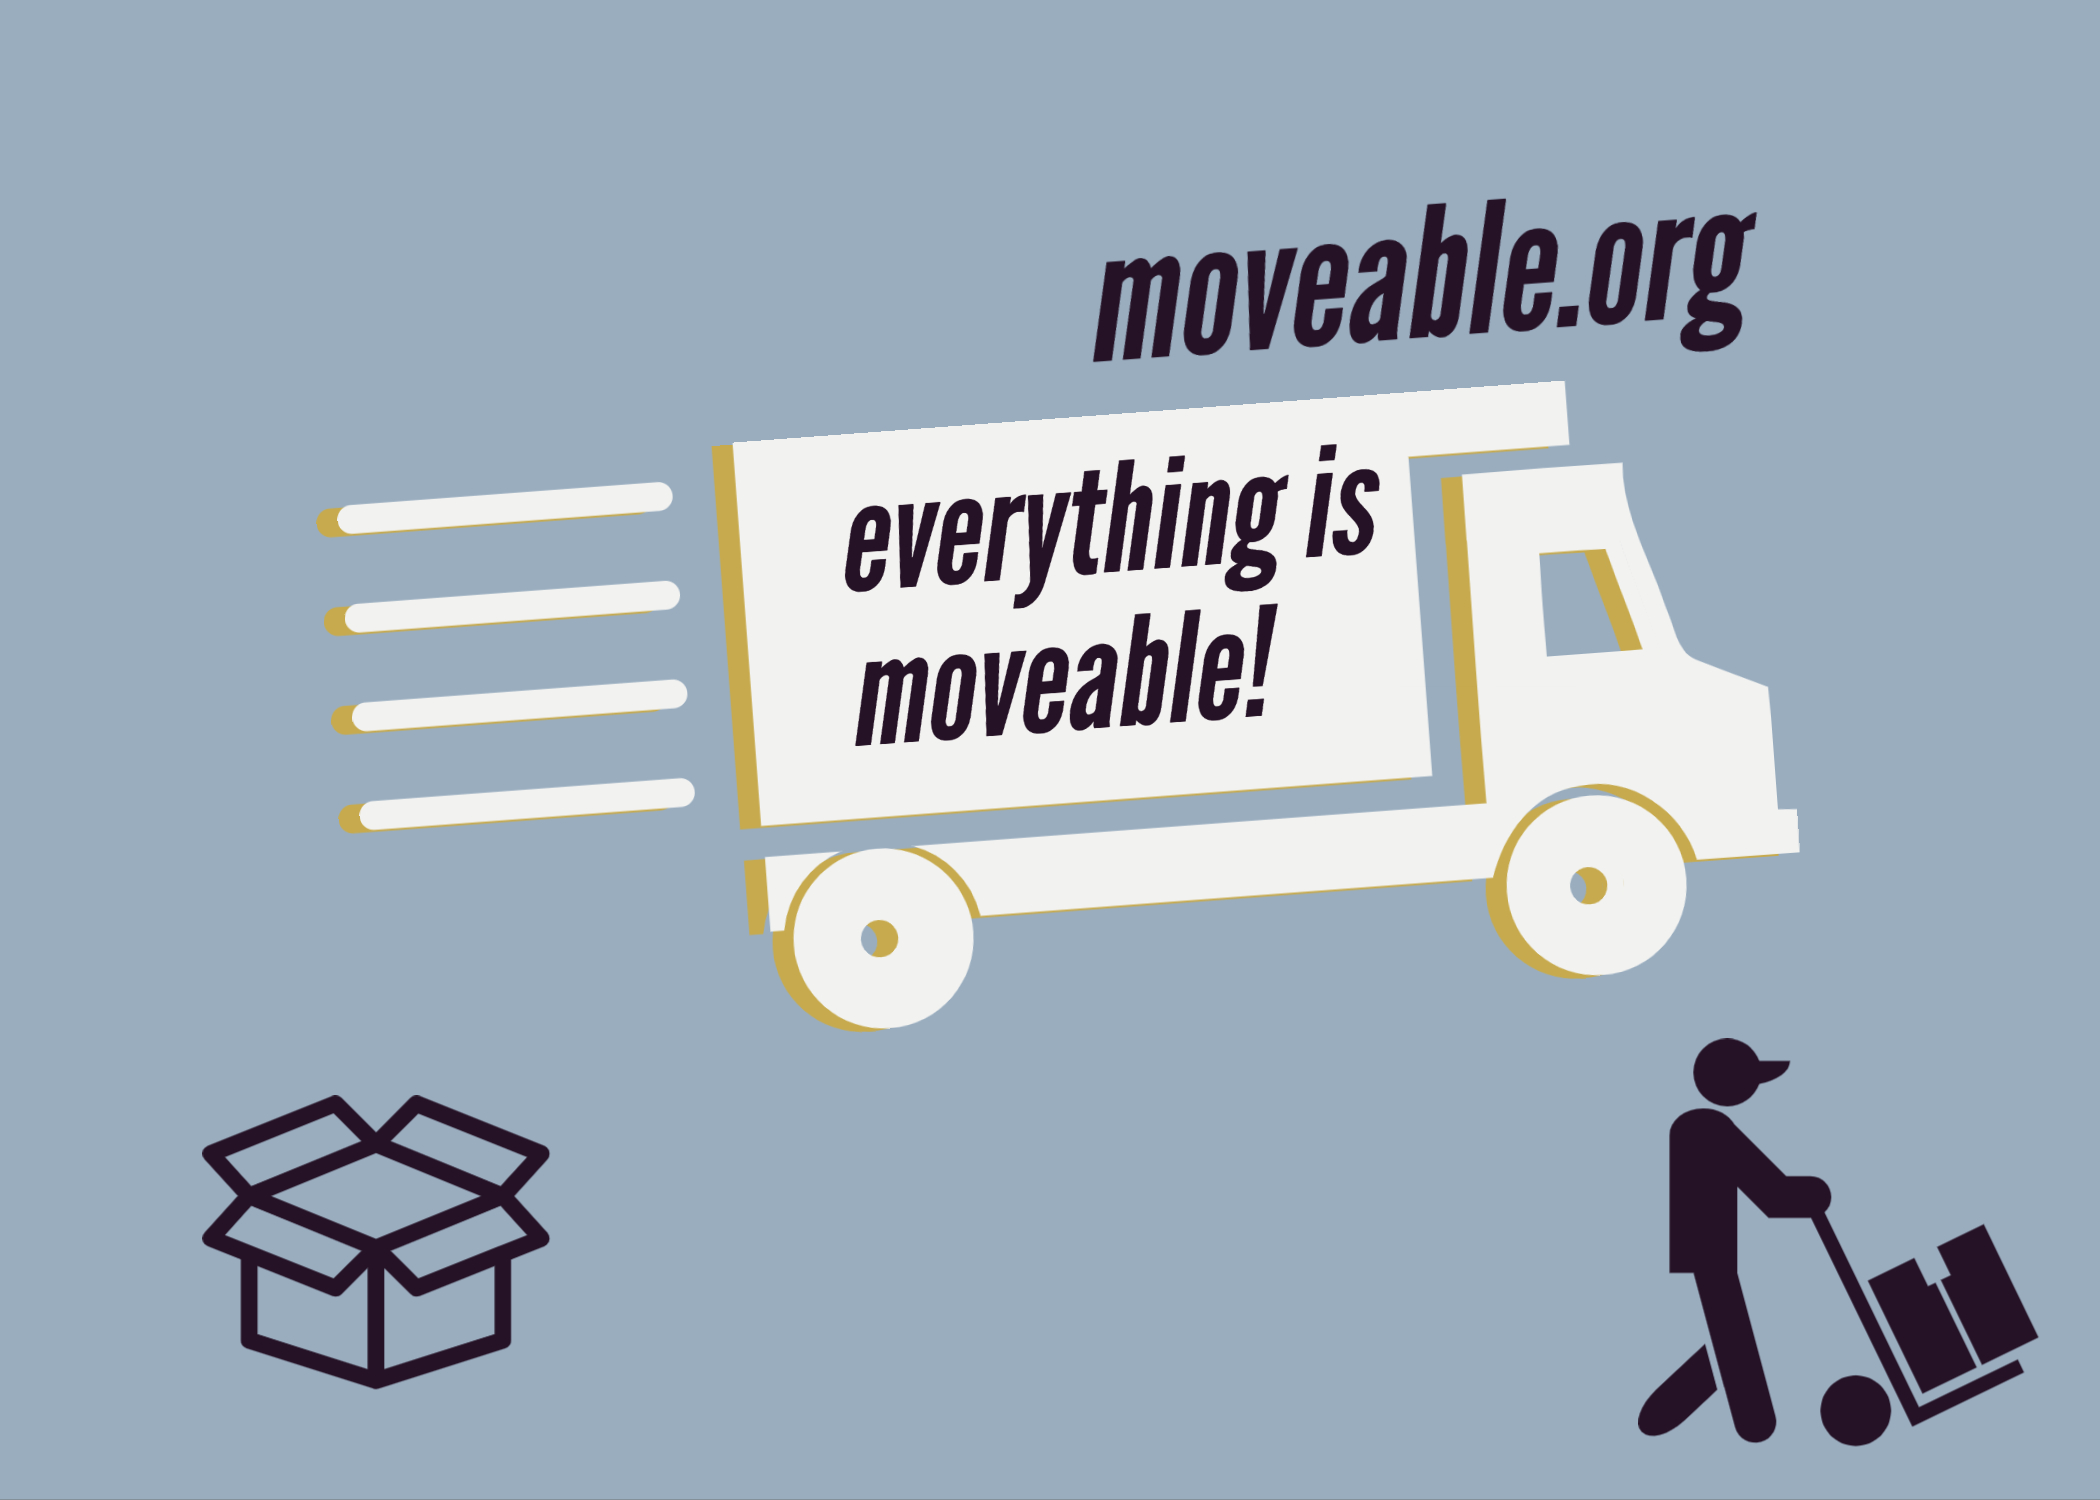 Moveable